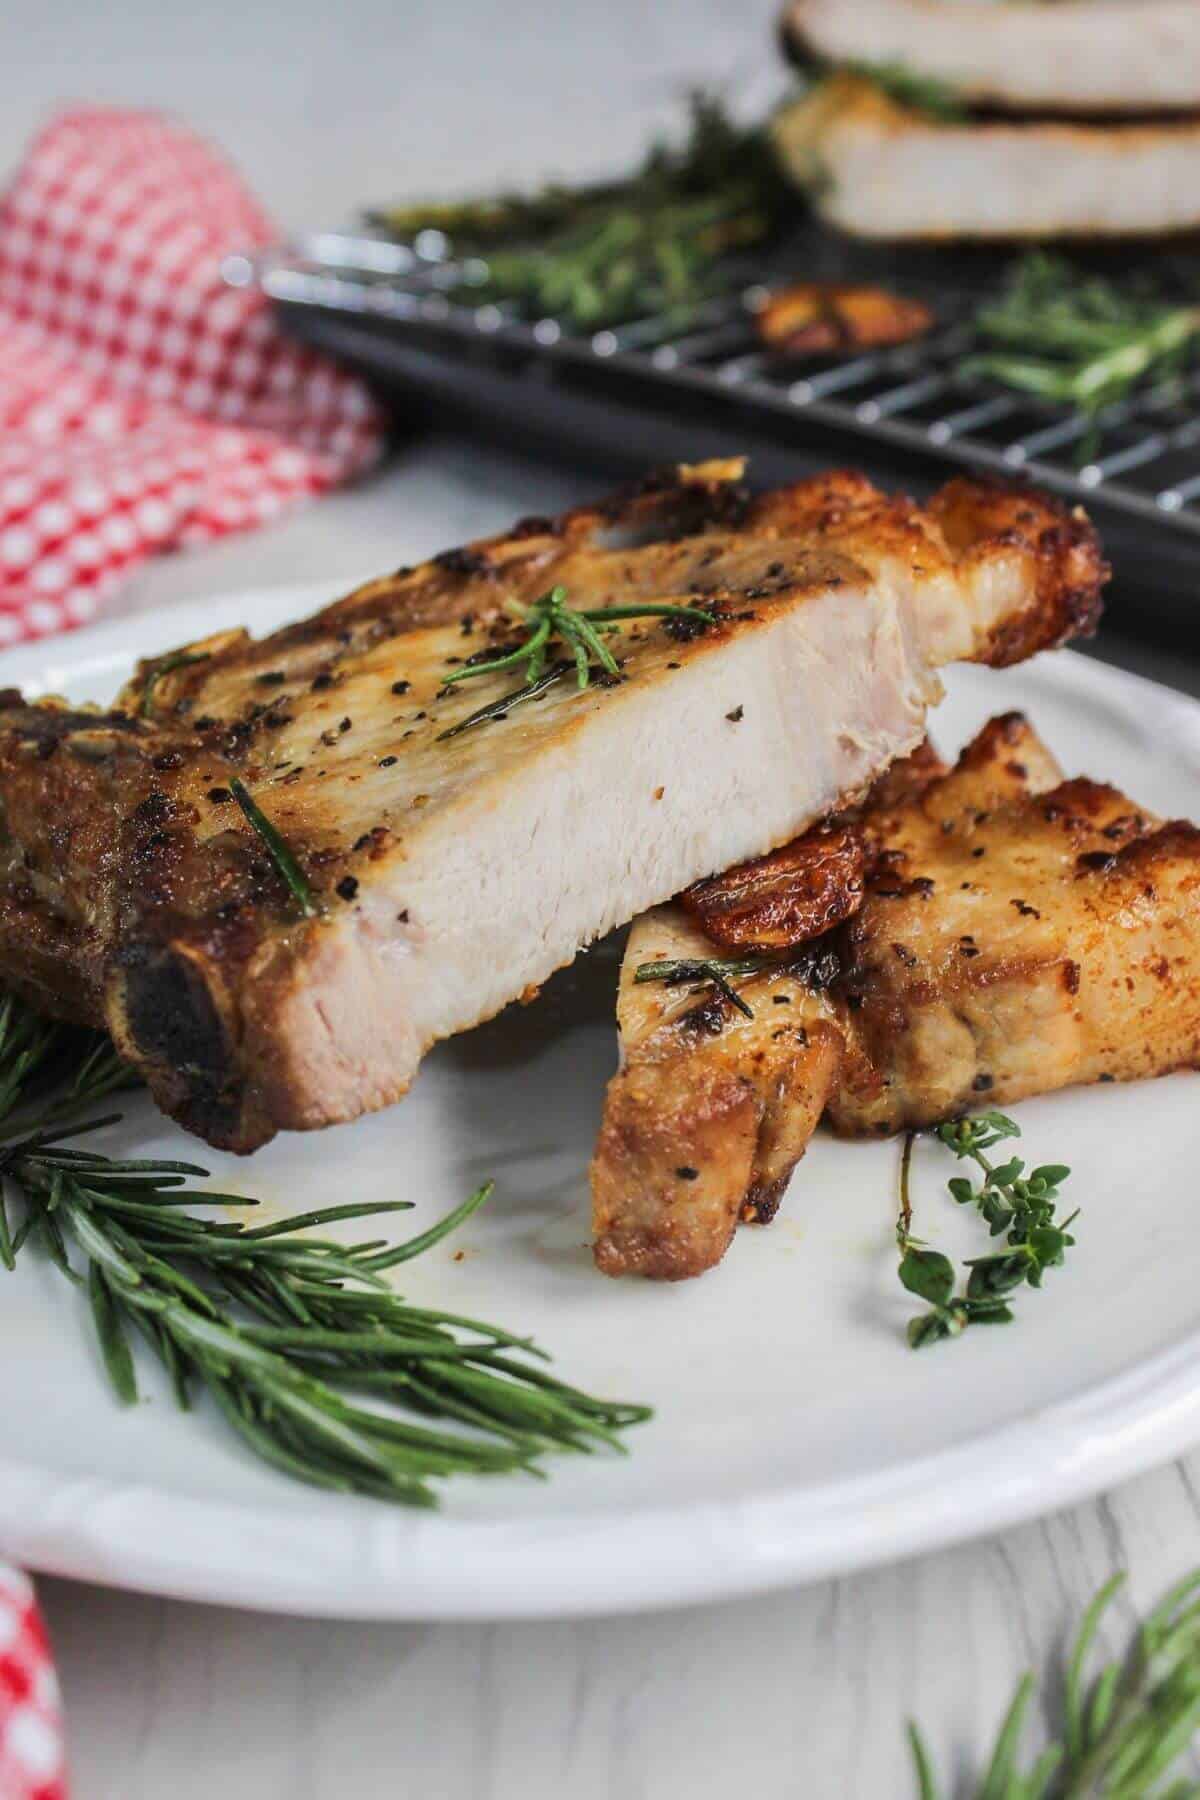 Pan-fried pork chops on a plate with rosemary sprigs.